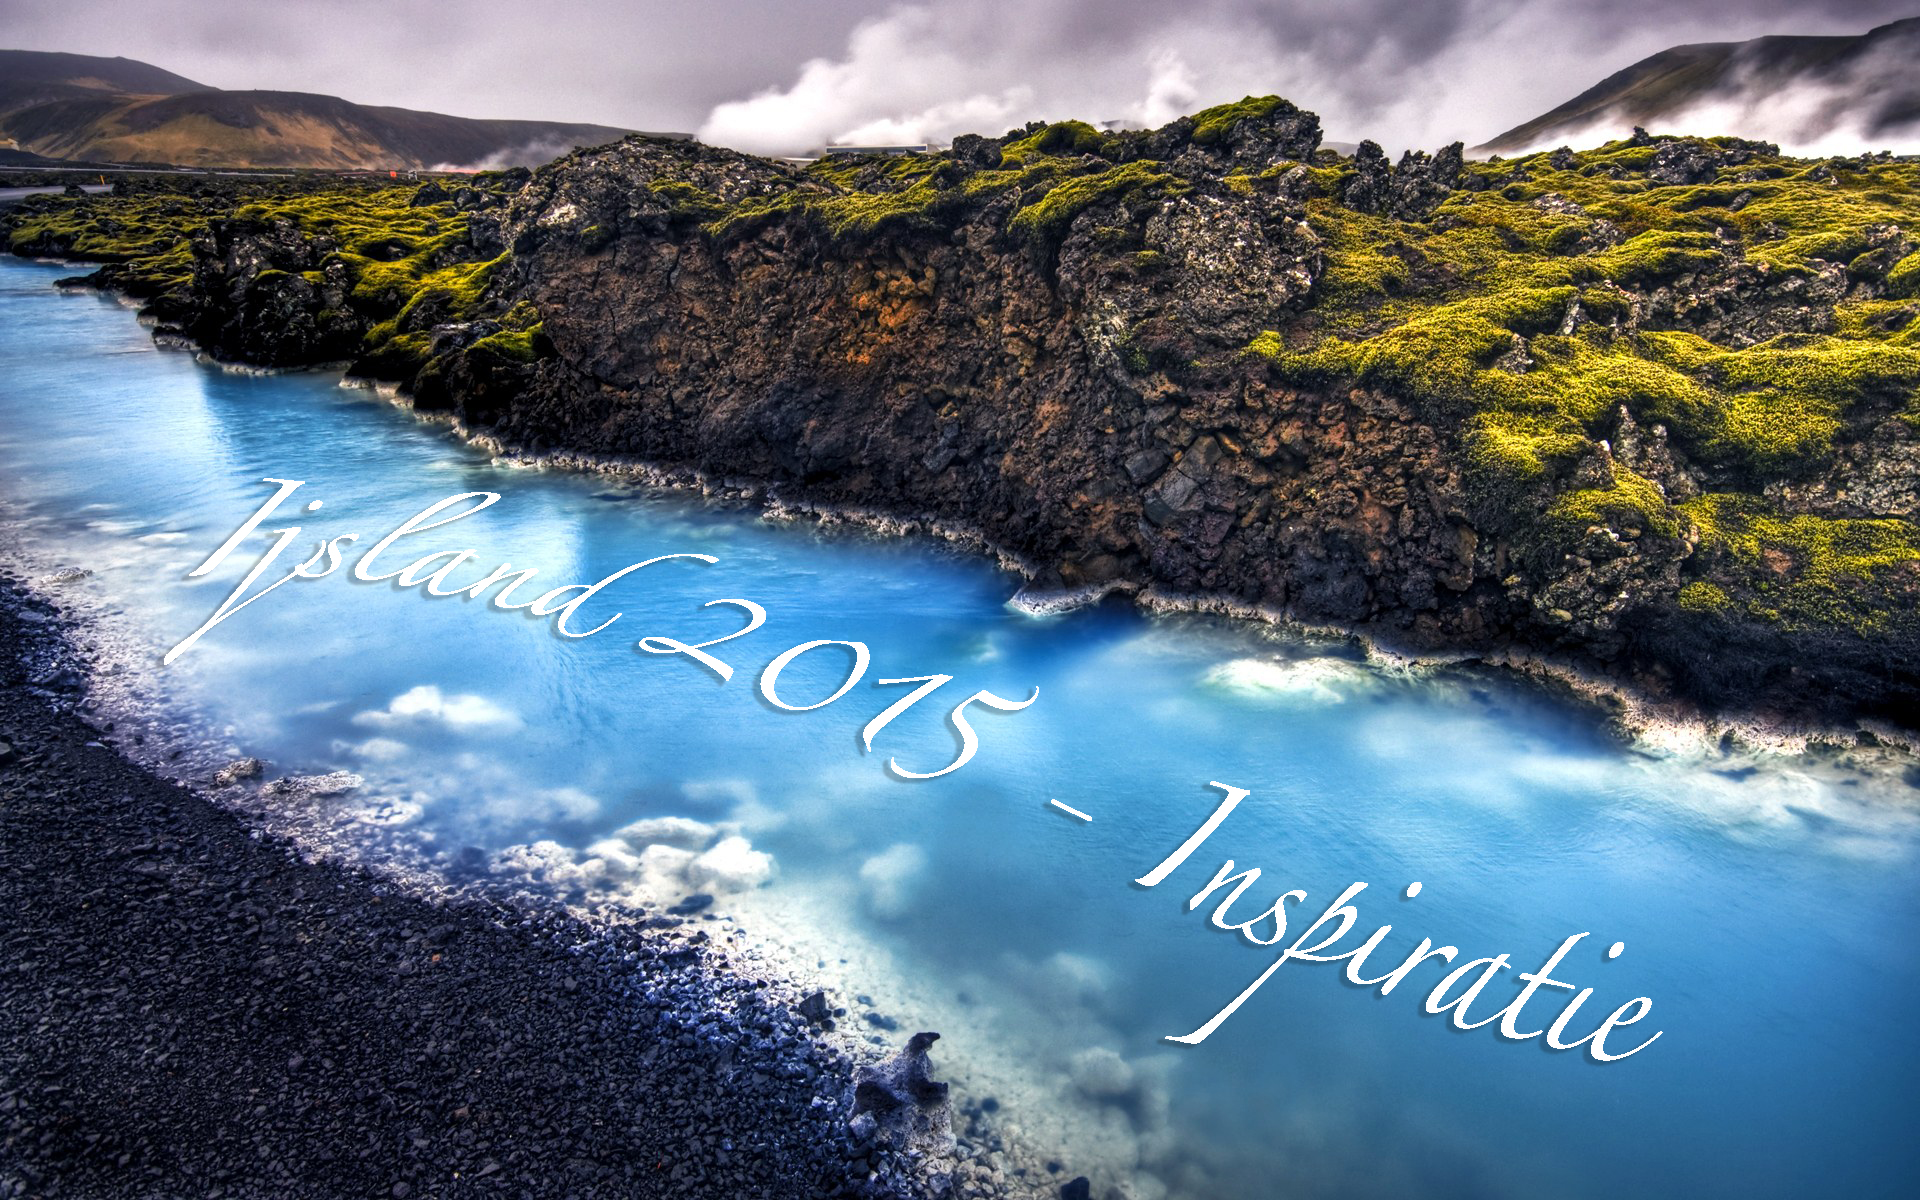 hdr-iceland-landscape-the-blue-calcite-stream-near-the-geothermal-event_1920x1200_57943kopie